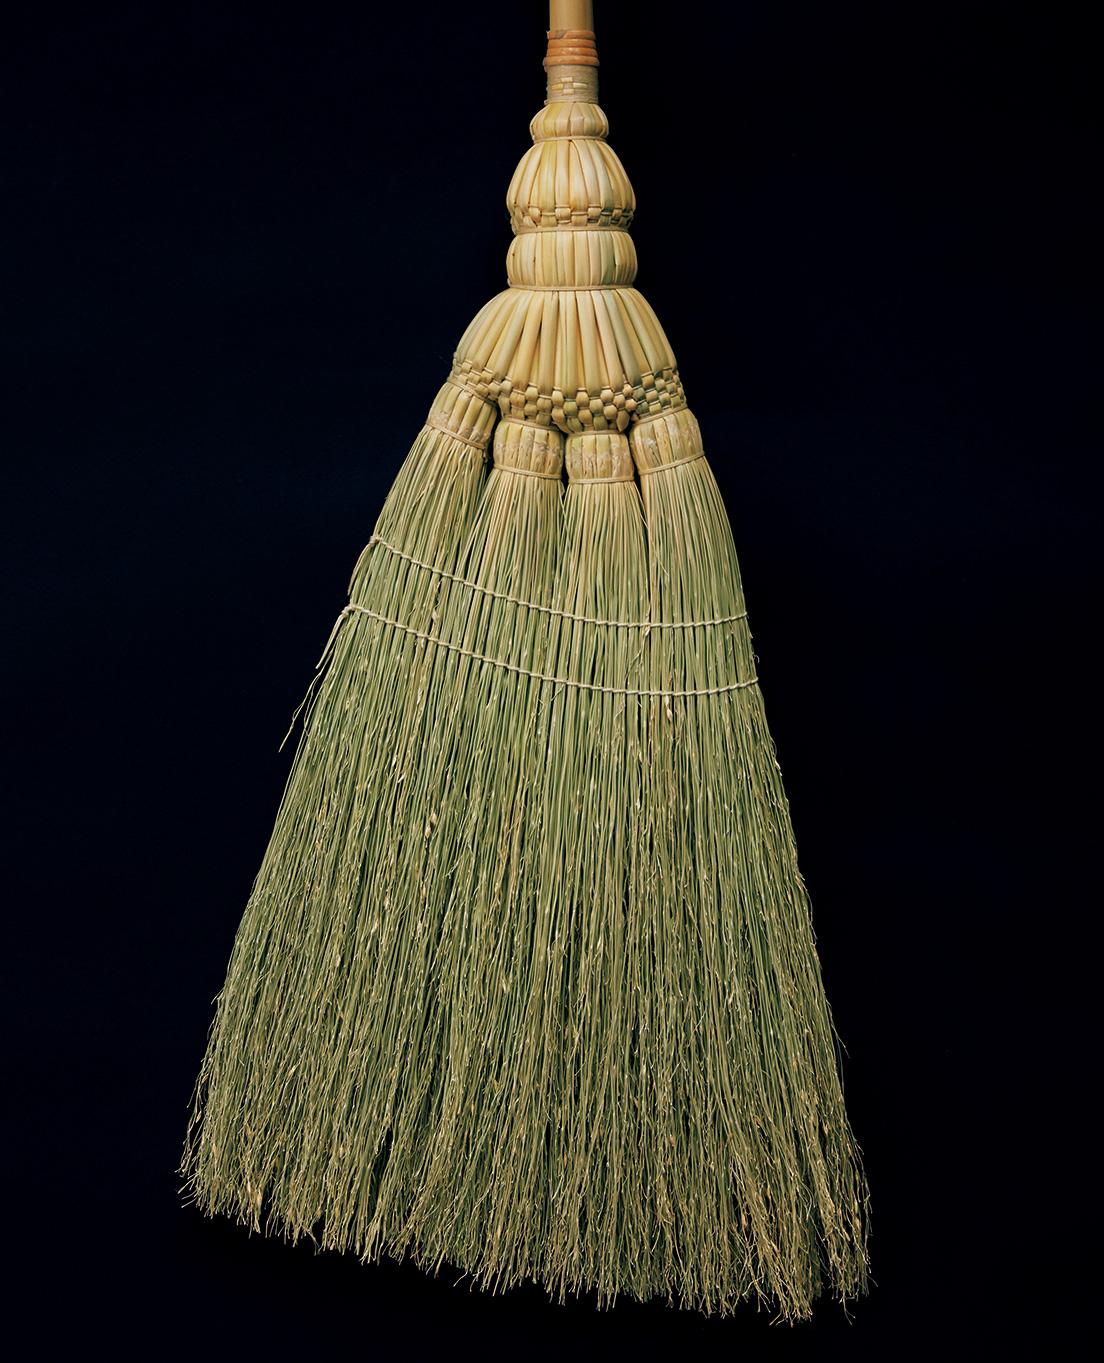 Purchase No. 29 [Matsumoto Hōki] A supple, sturdy broom from a town known for its folk arts.